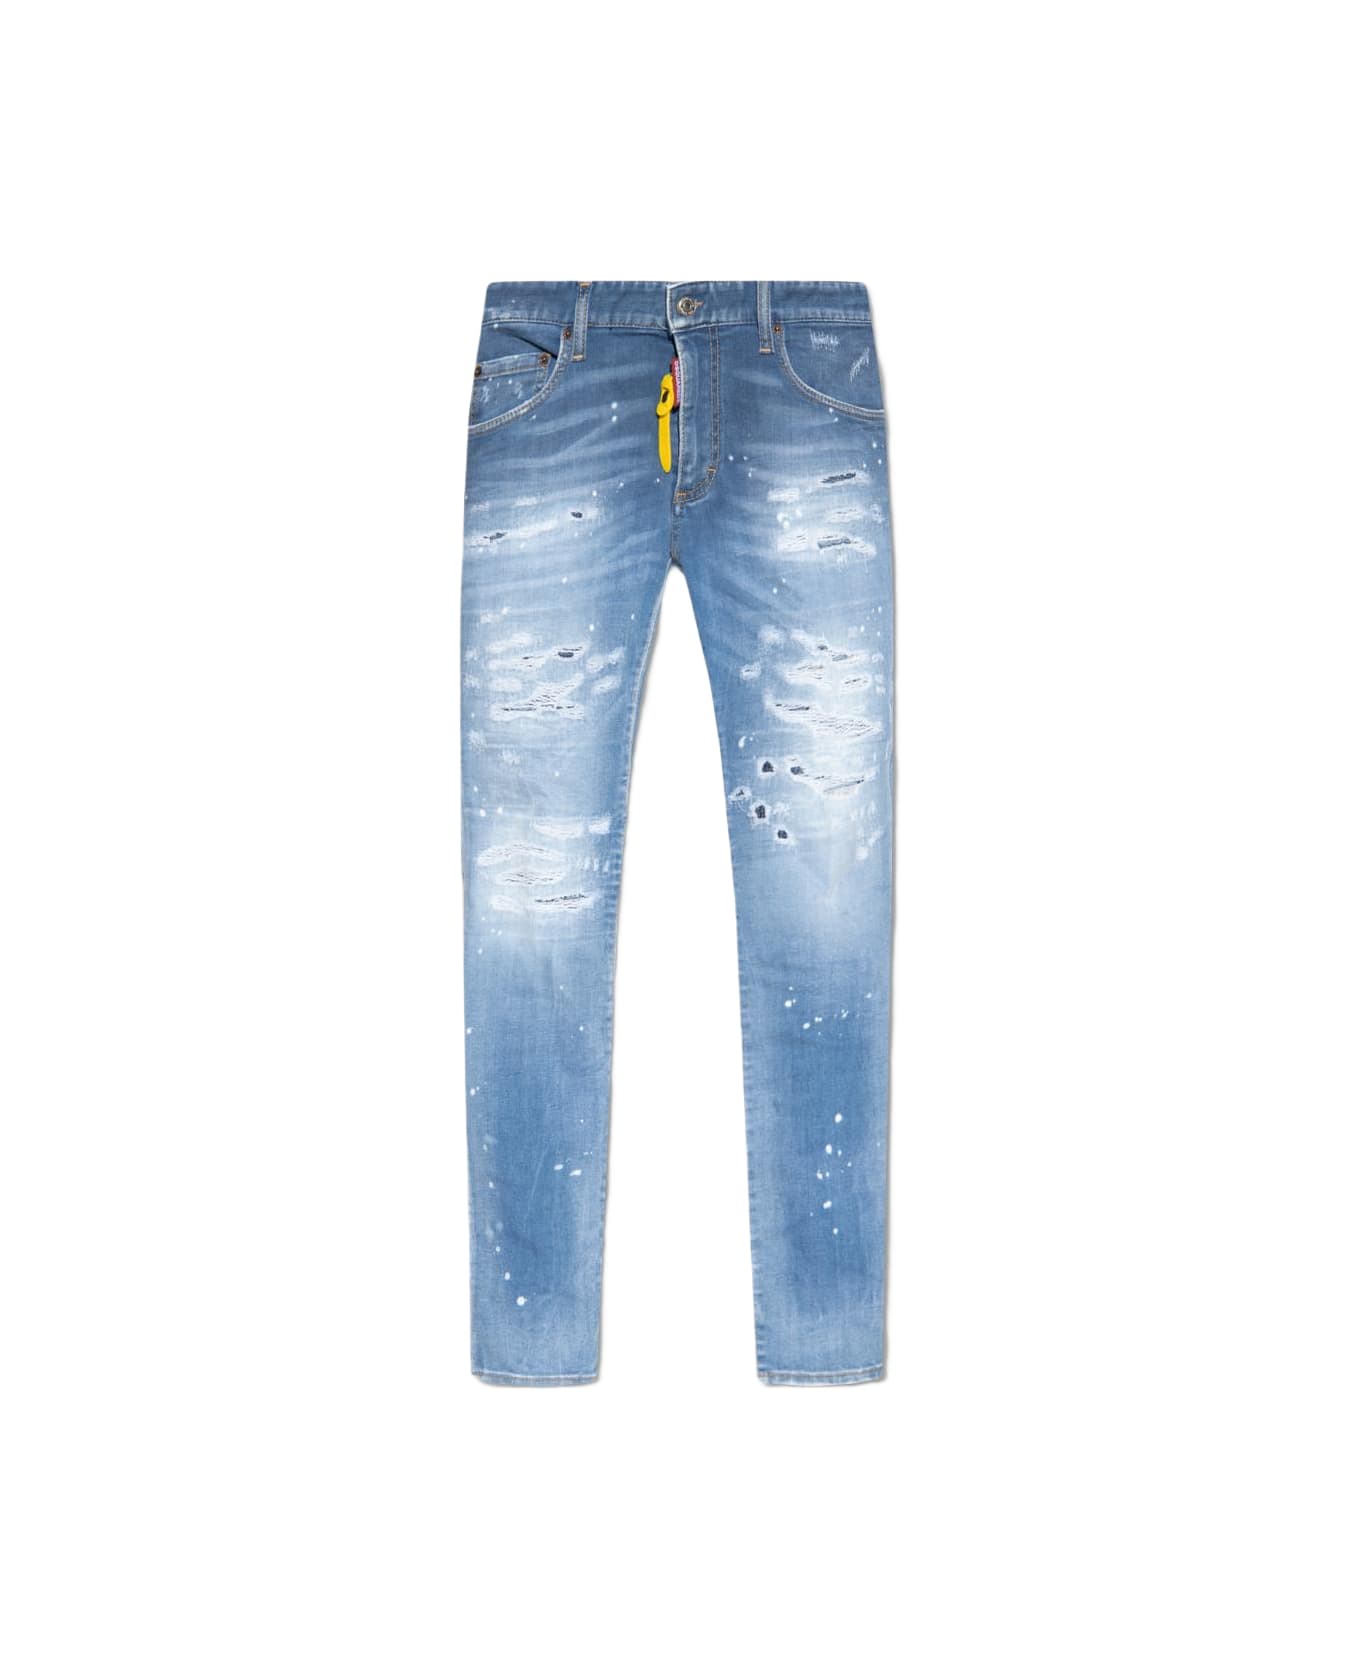 Dsquared2 5 Pockets Jeans - Blue navy ボトムス